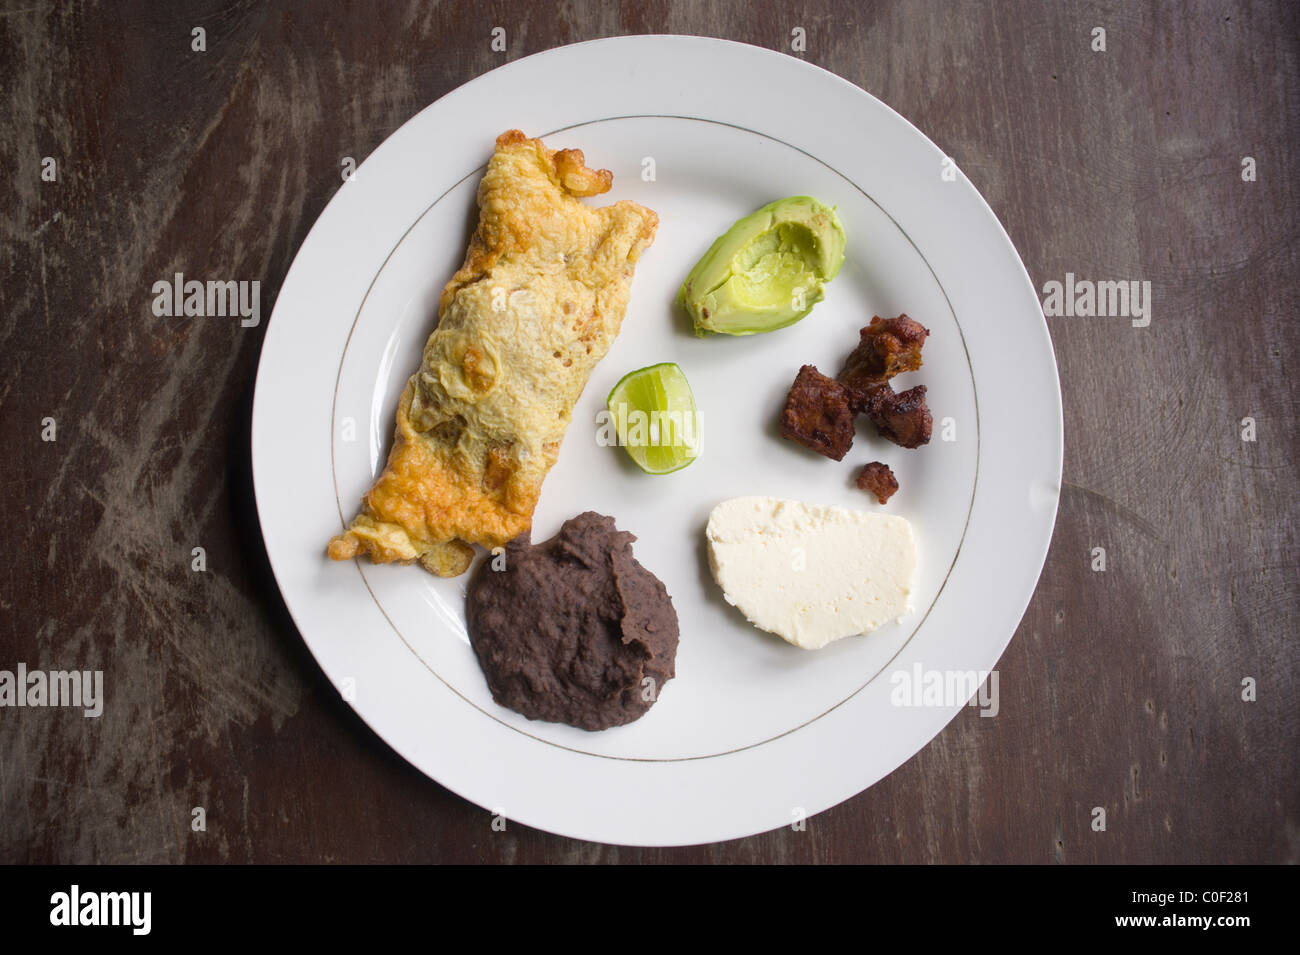 Selection of foods from Honduras. Omelette filled with vegetables, Refried beans, Fresh Cheese, Chicharrón, Avocado and lime. Stock Photo